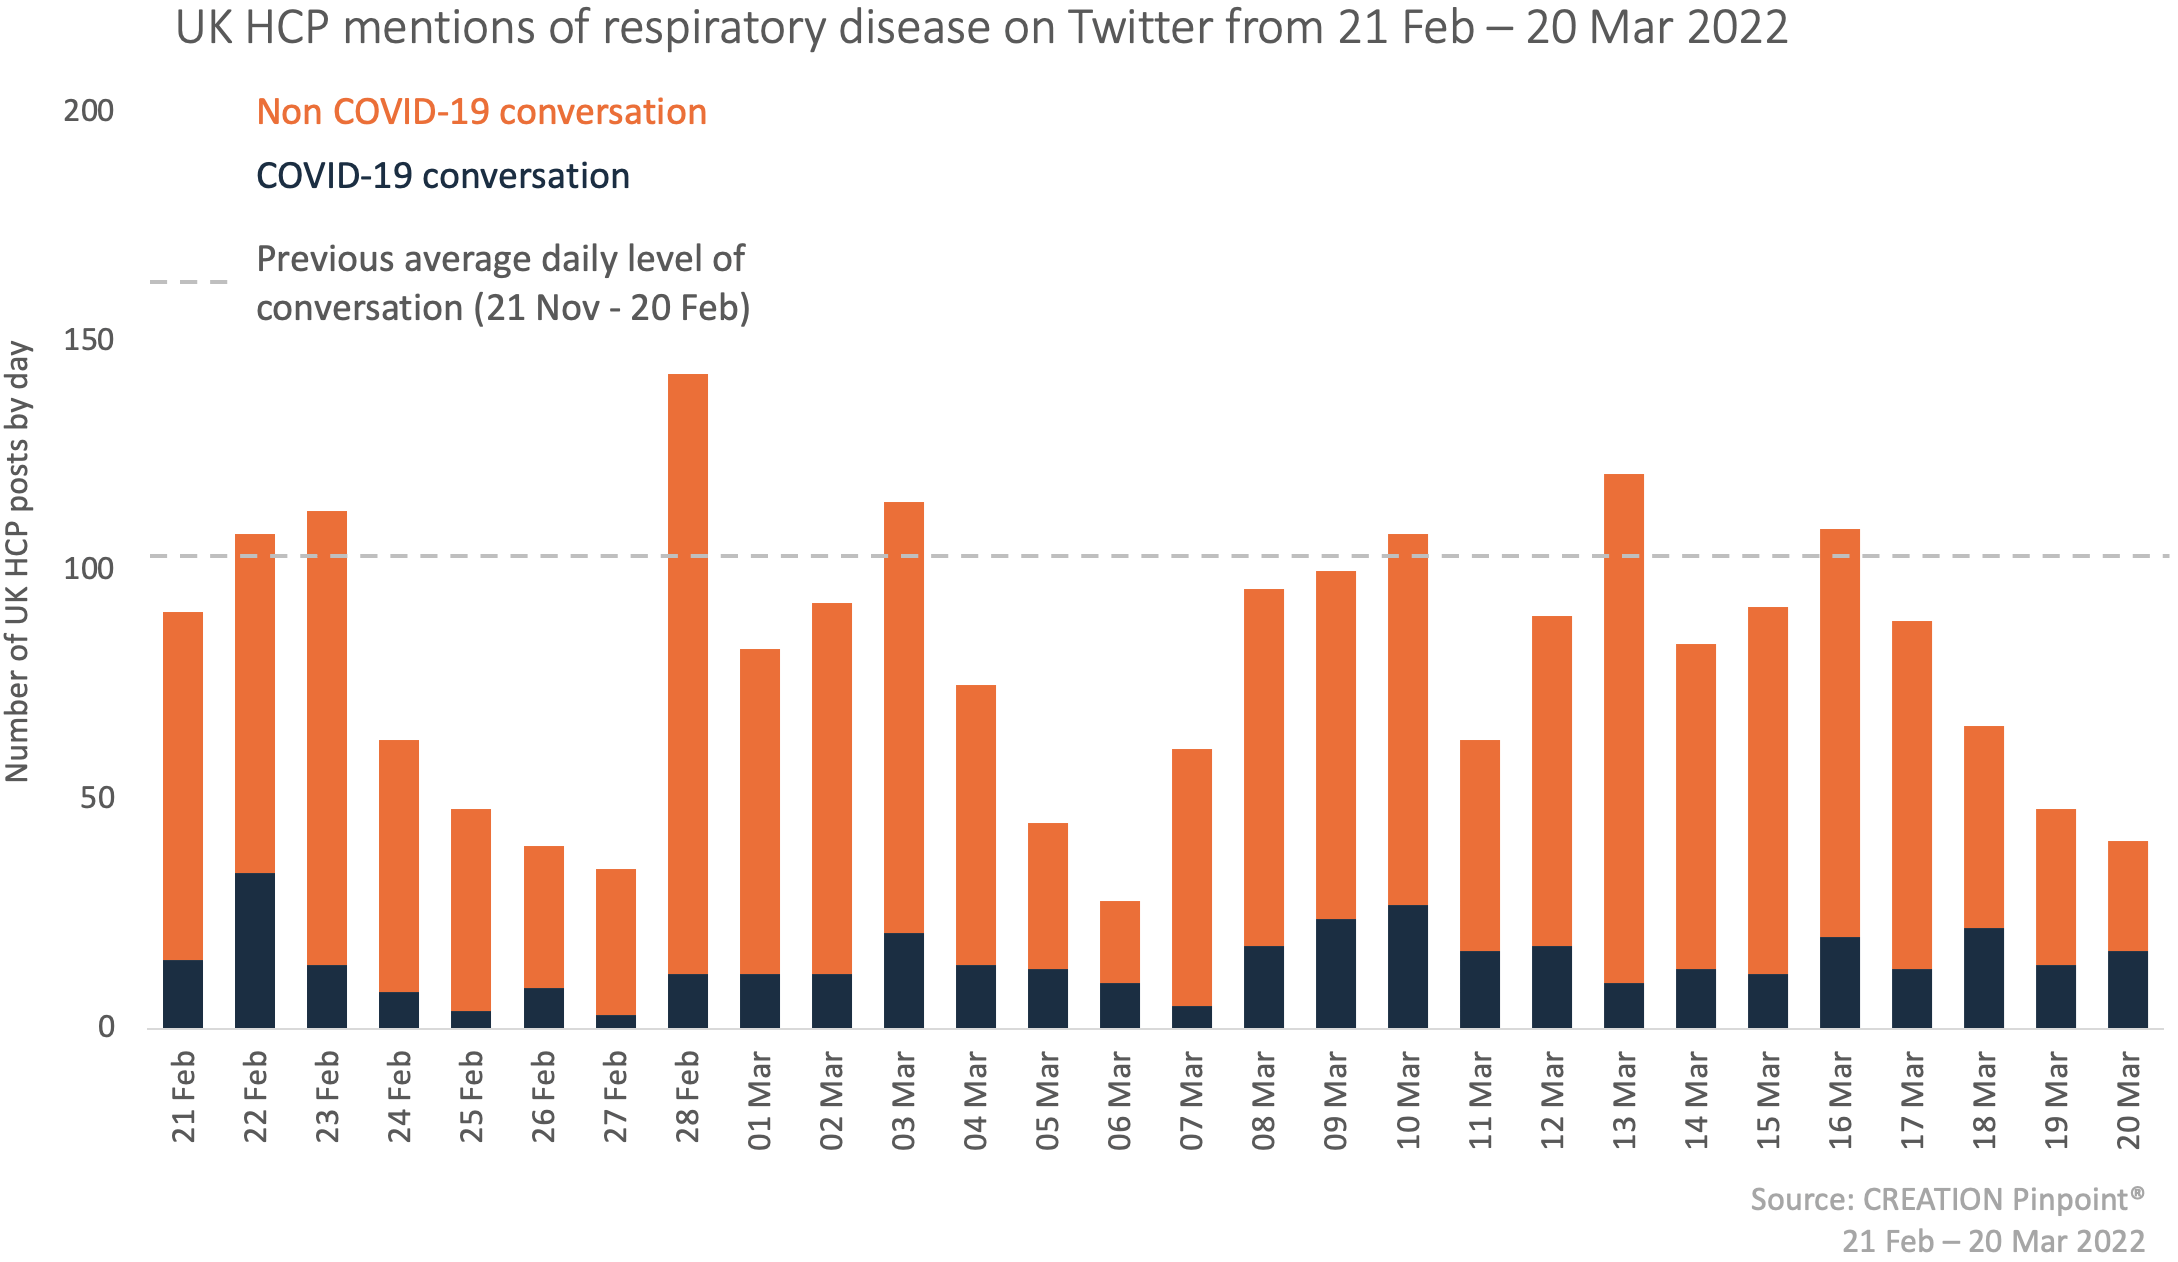 Image of a graph showing mentions over respiratory disease on Twitter 